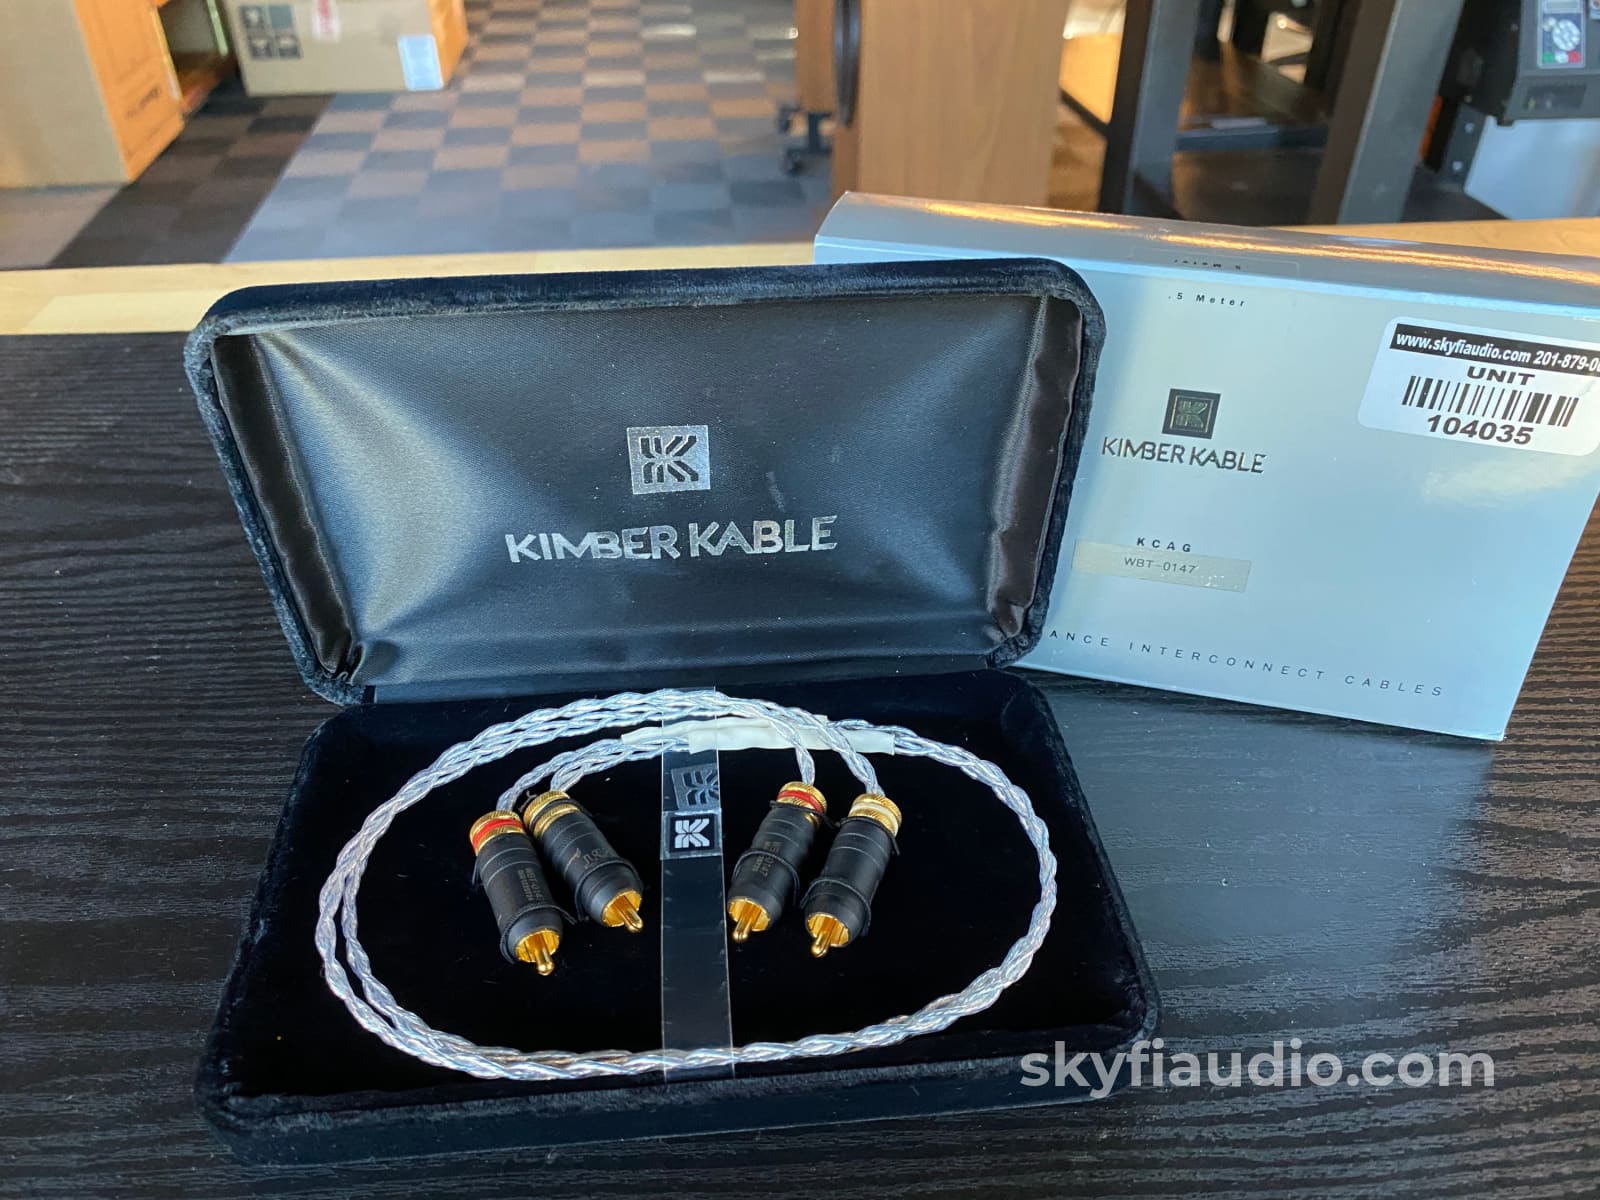 Kimber Kable Kcag Rca Audio Interconnects - 0.5M With Wbt Cables